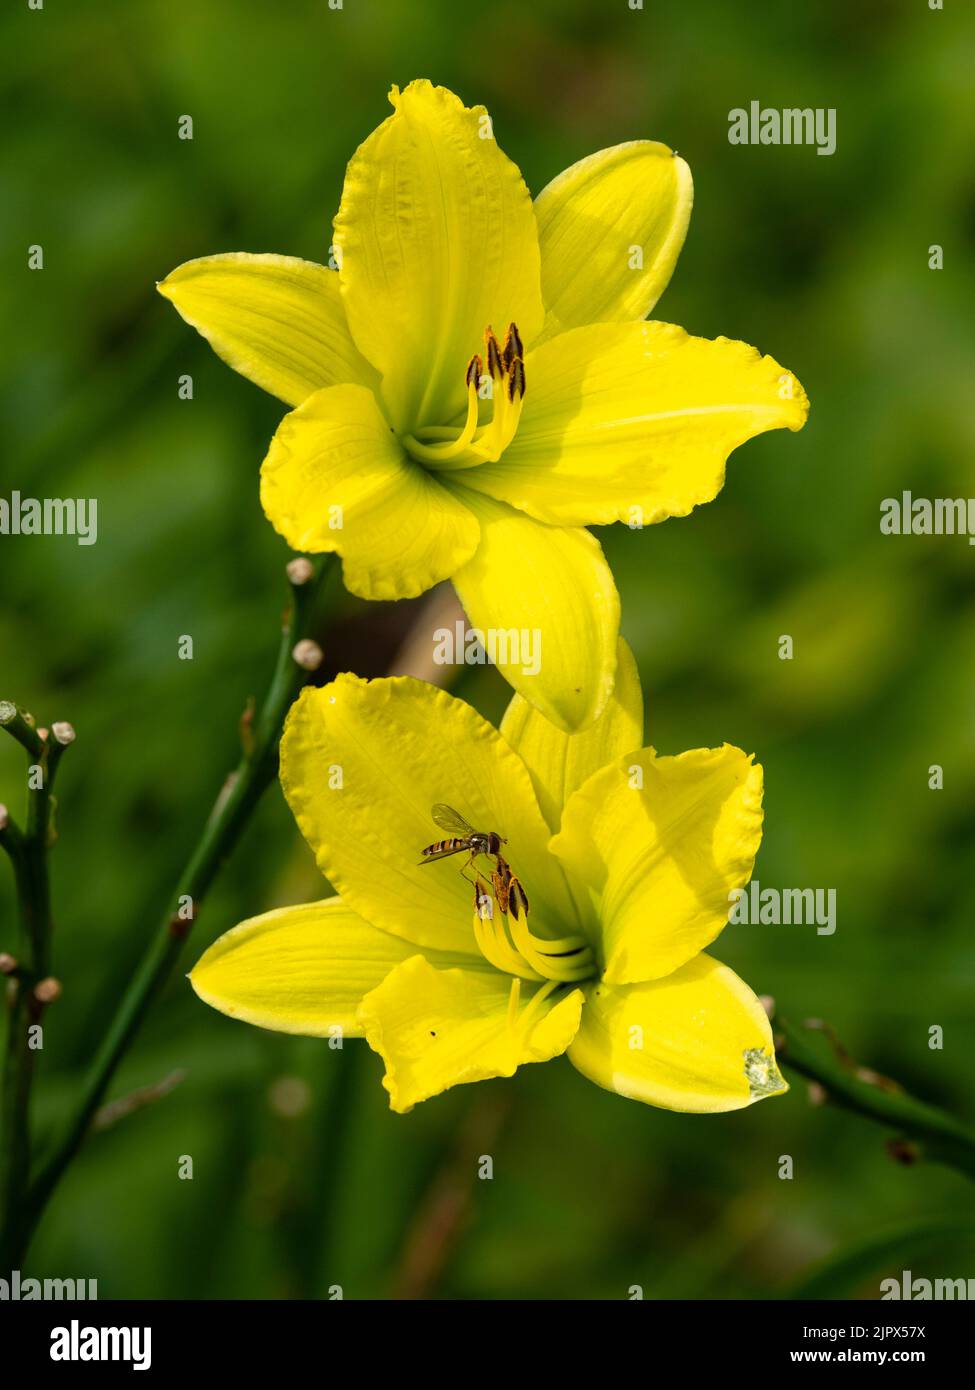 Green tinged yellow trumpet flowers of the summer blooming hardy day lily, Hemerocallis 'Green Flutter' Stock Photo